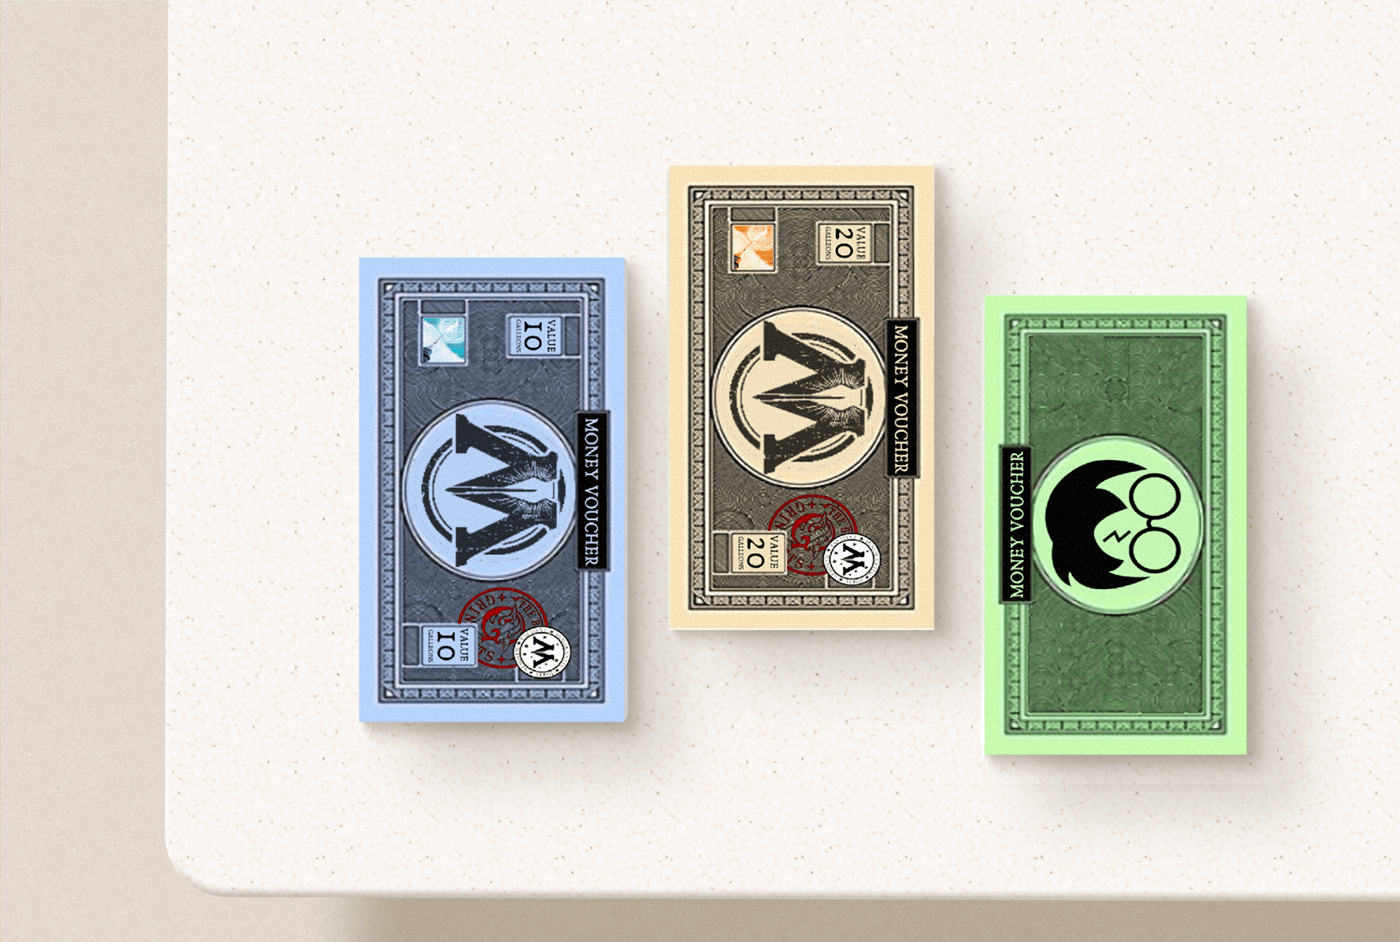 Harry Potter-style monopoly money for a magical game!